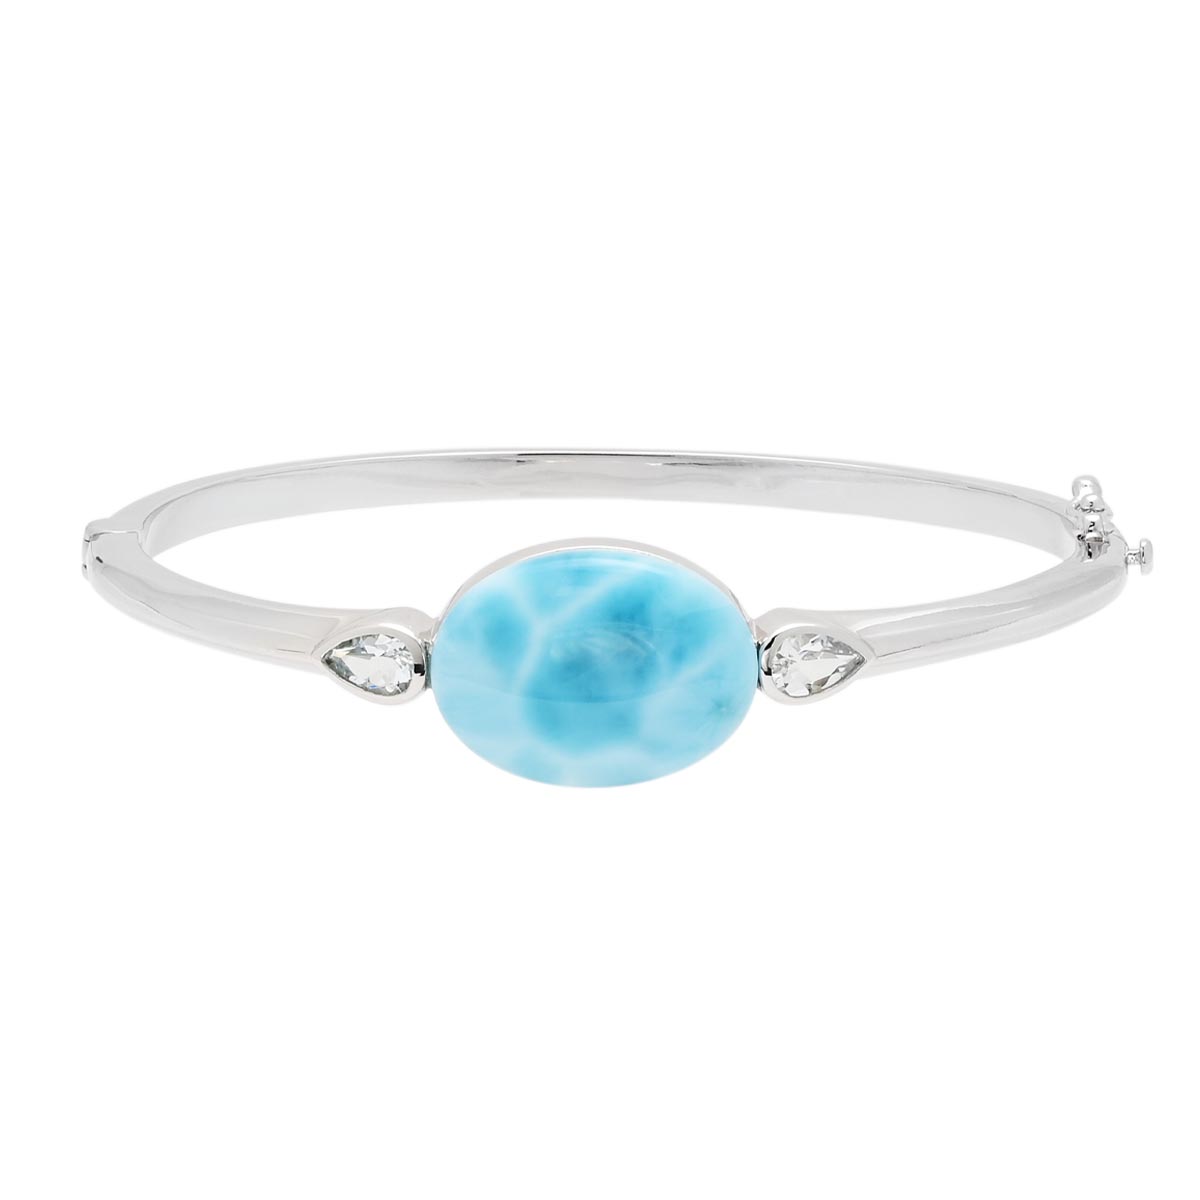 Alamea Oval Larimar Bangle Bracelet in Sterling Silver with Cubic Zirconia